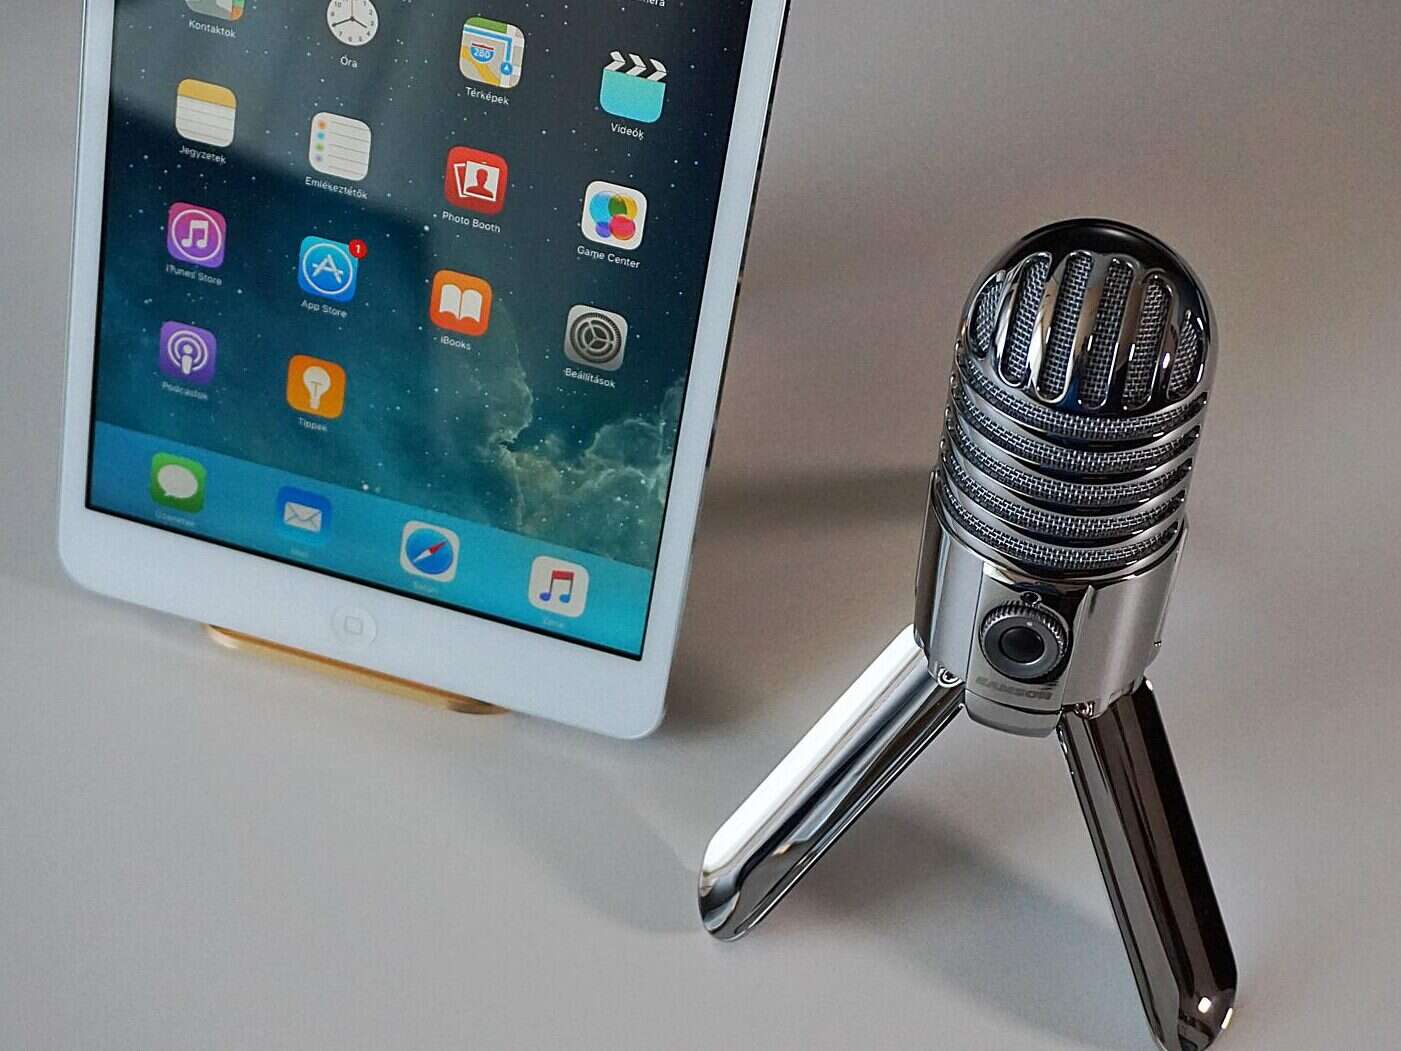 Publisher audio revenue - microphone and iPad